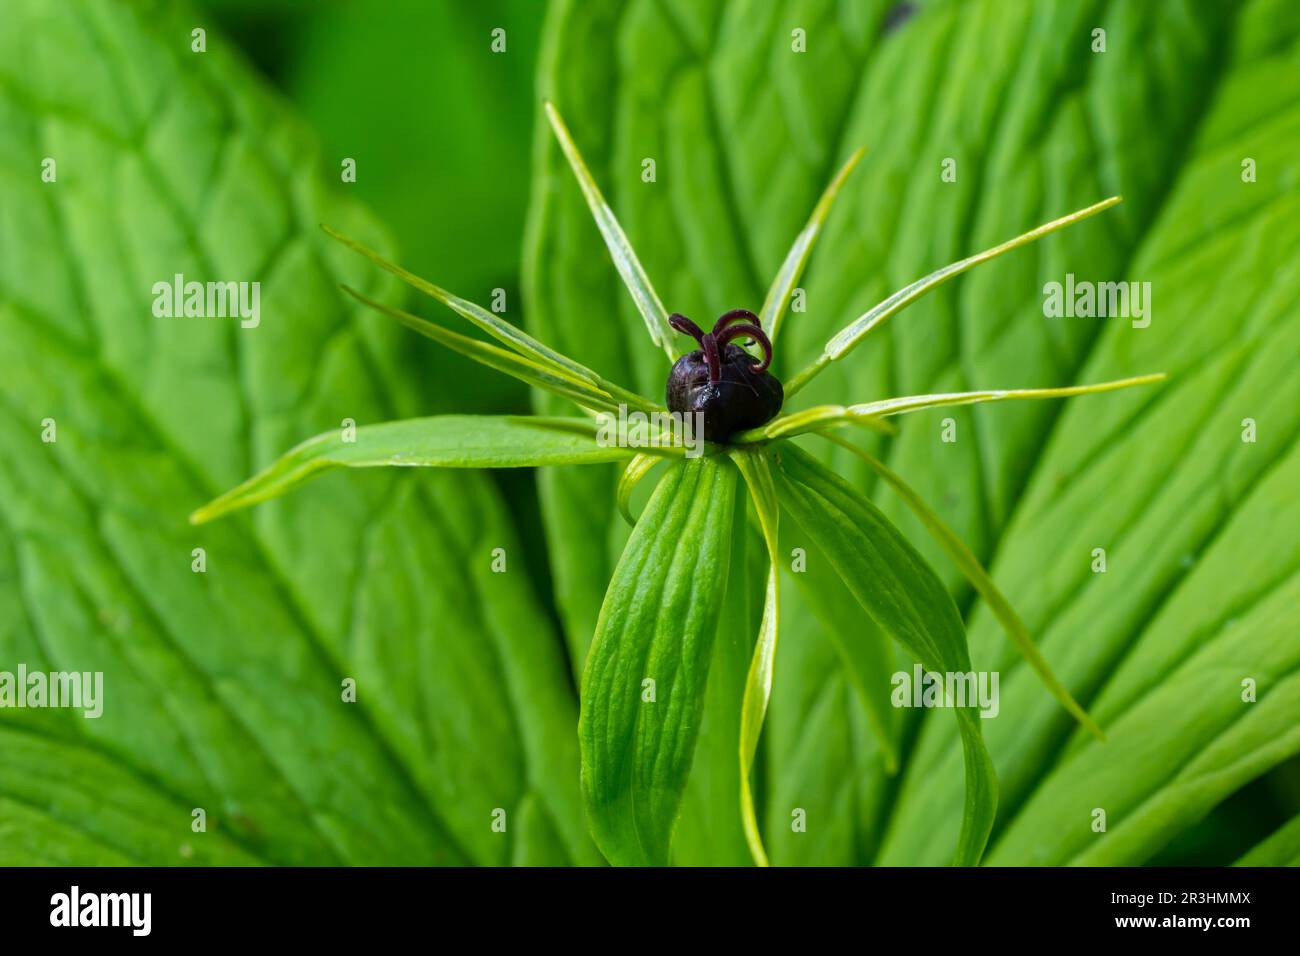 Paris quadrifolia. Flower close-up of the poisonous plant, herb-paris or the knot of true lovers. Blooming grass Paris. Crow's eye or raven eye, poiso Stock Photo